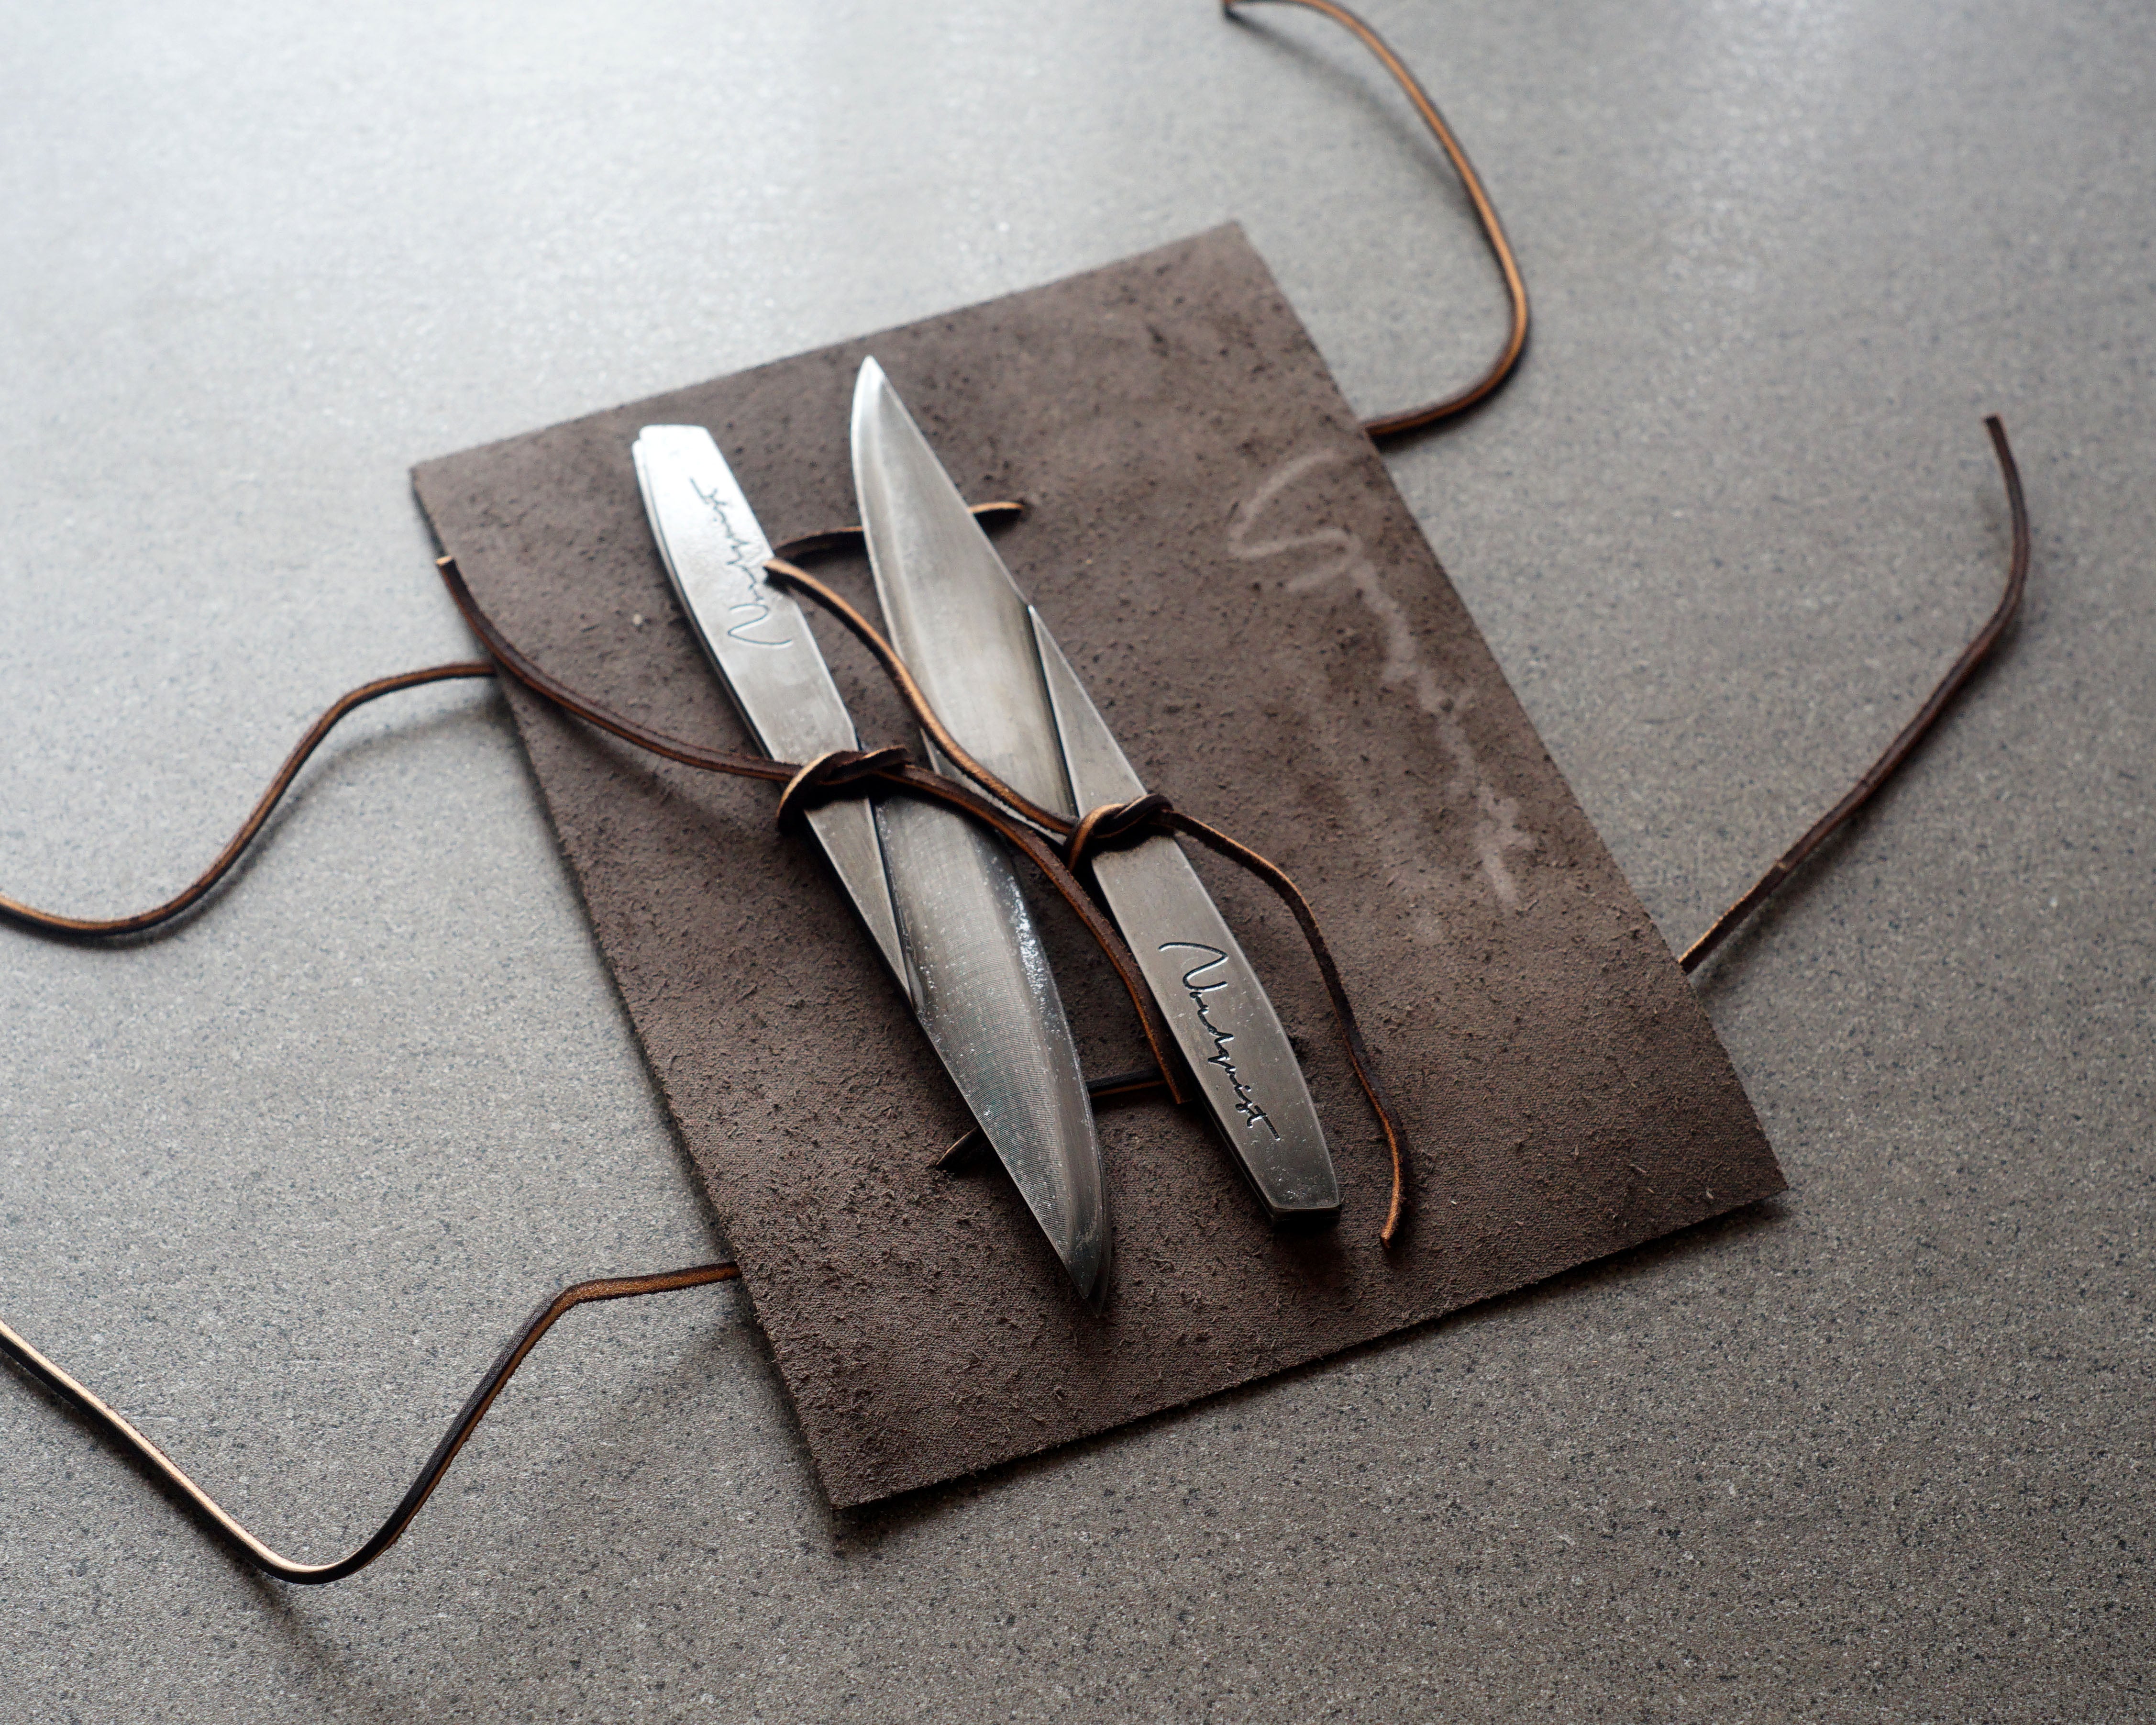 Handcrafted Steak Knives